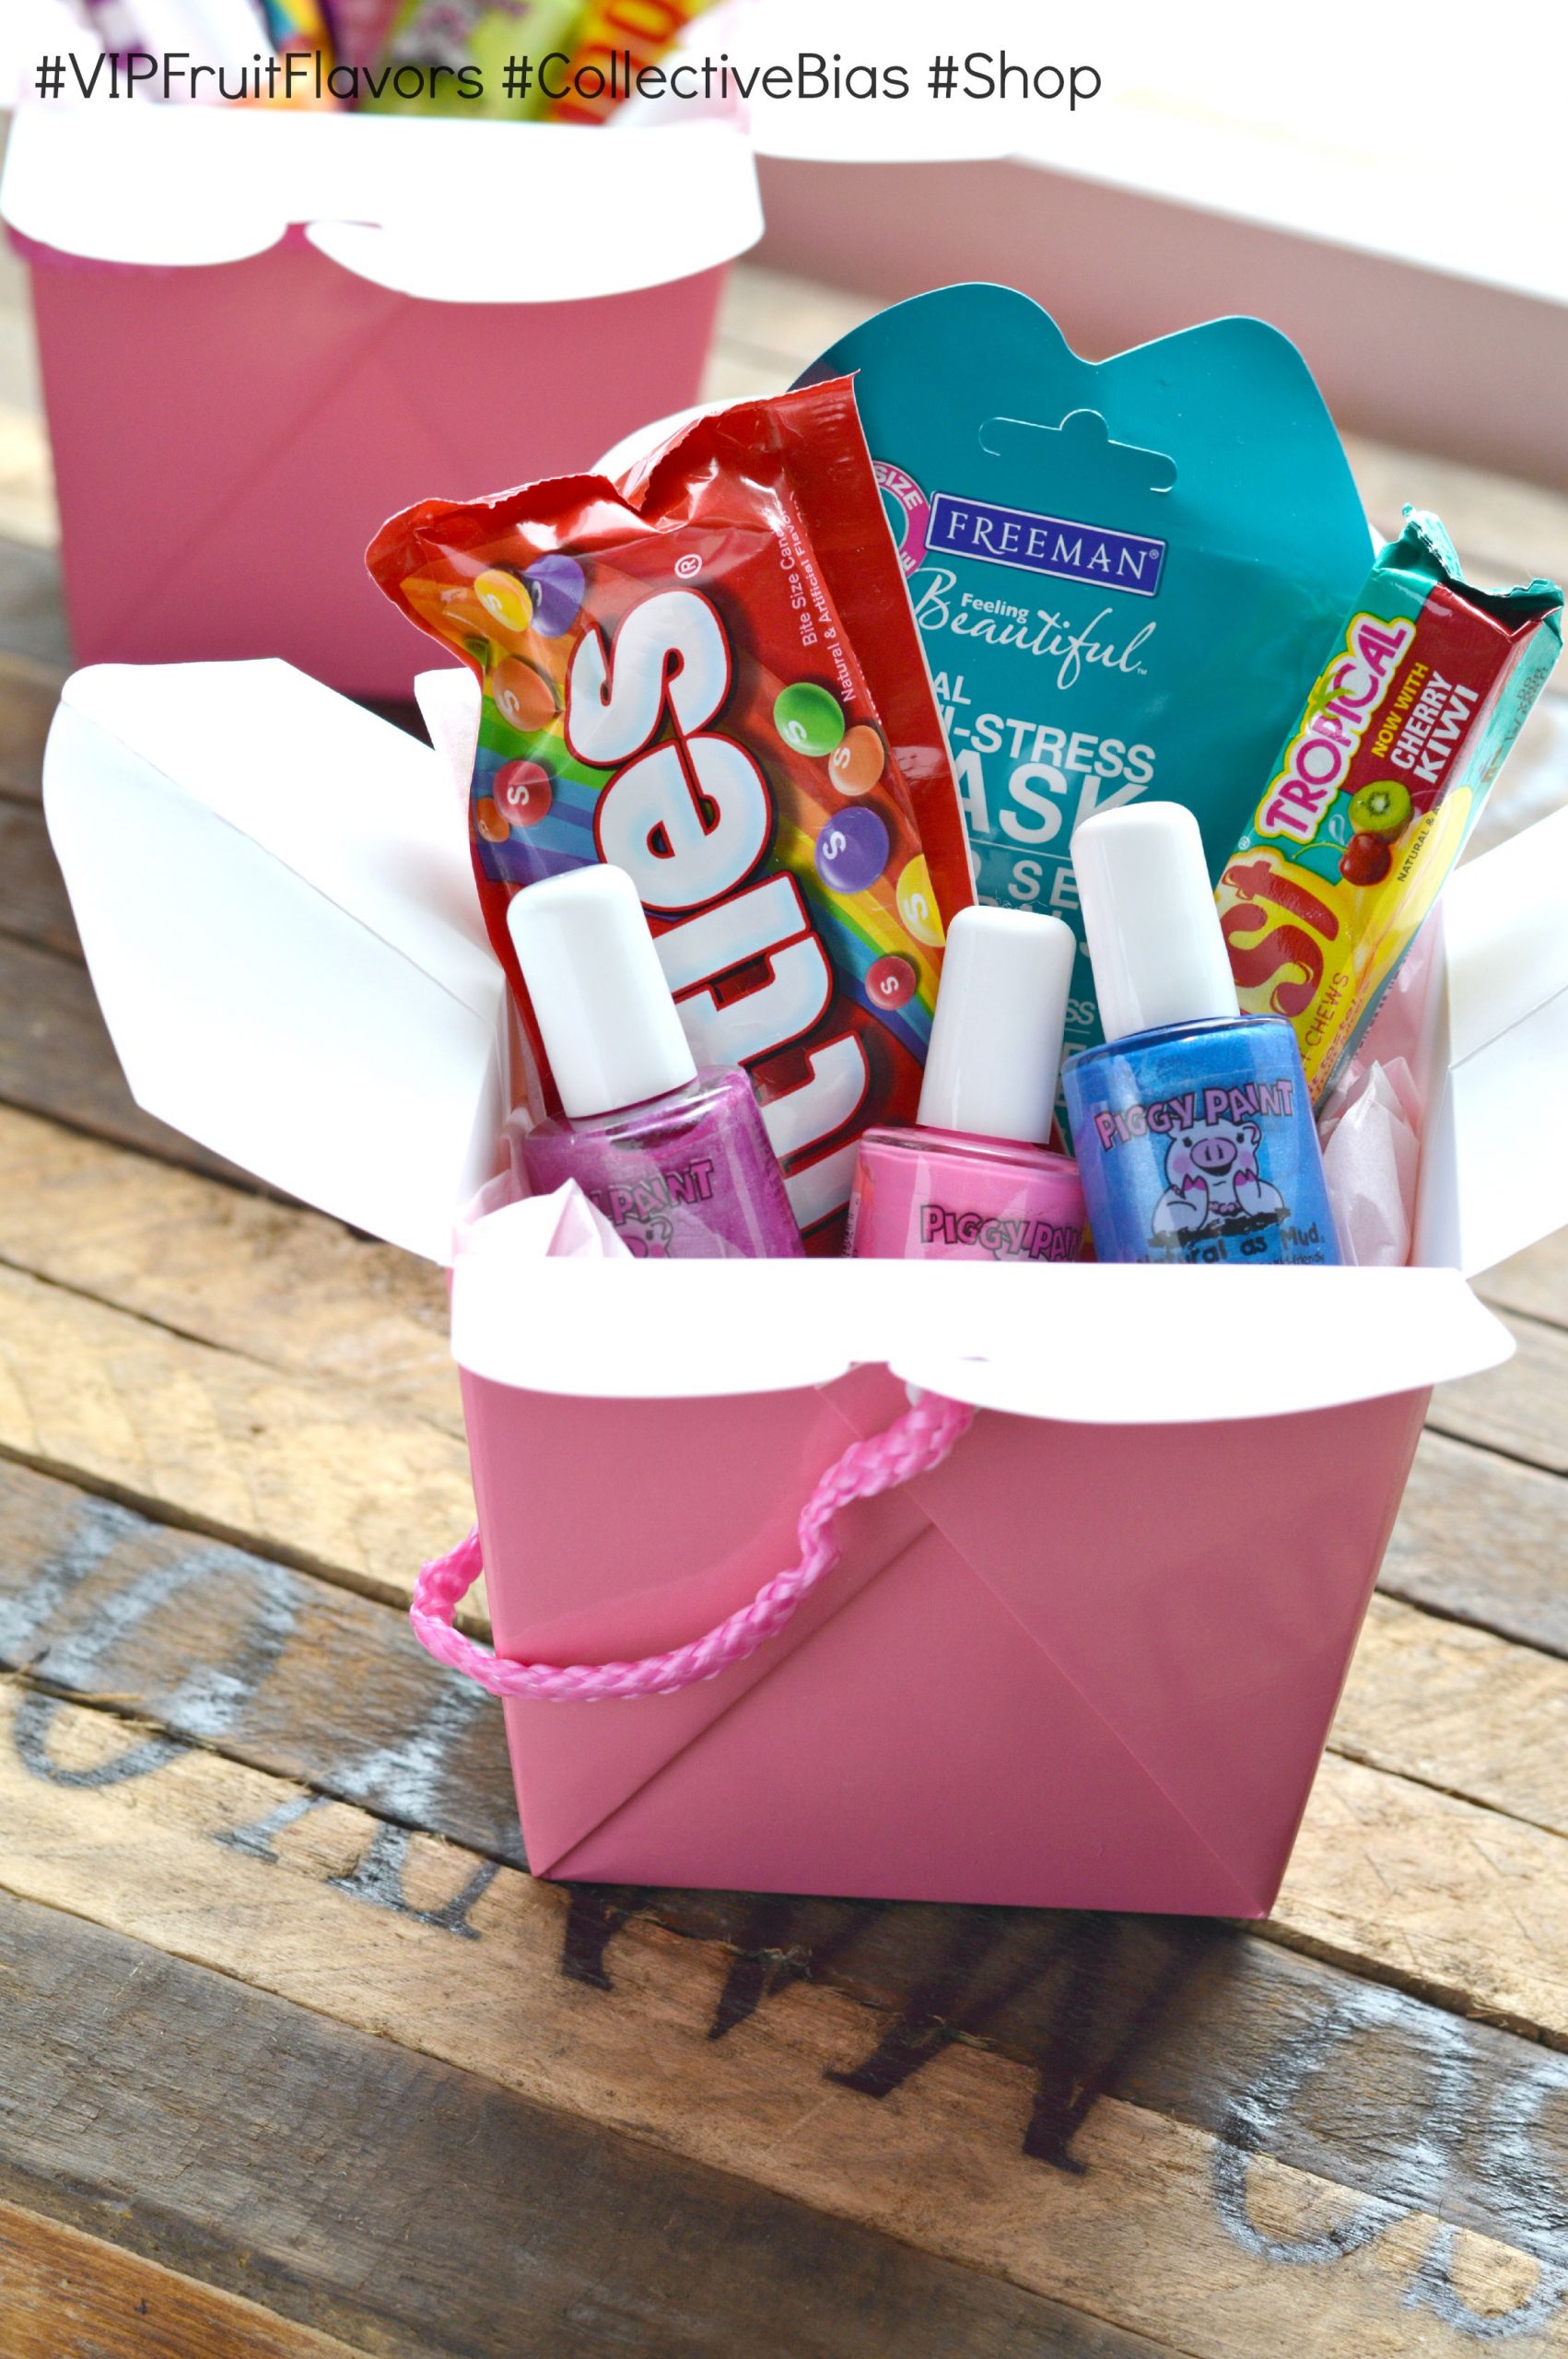 Birthday Diy Gifts
 Skittles & Starburst Make For Awesome DIY Gifts It s